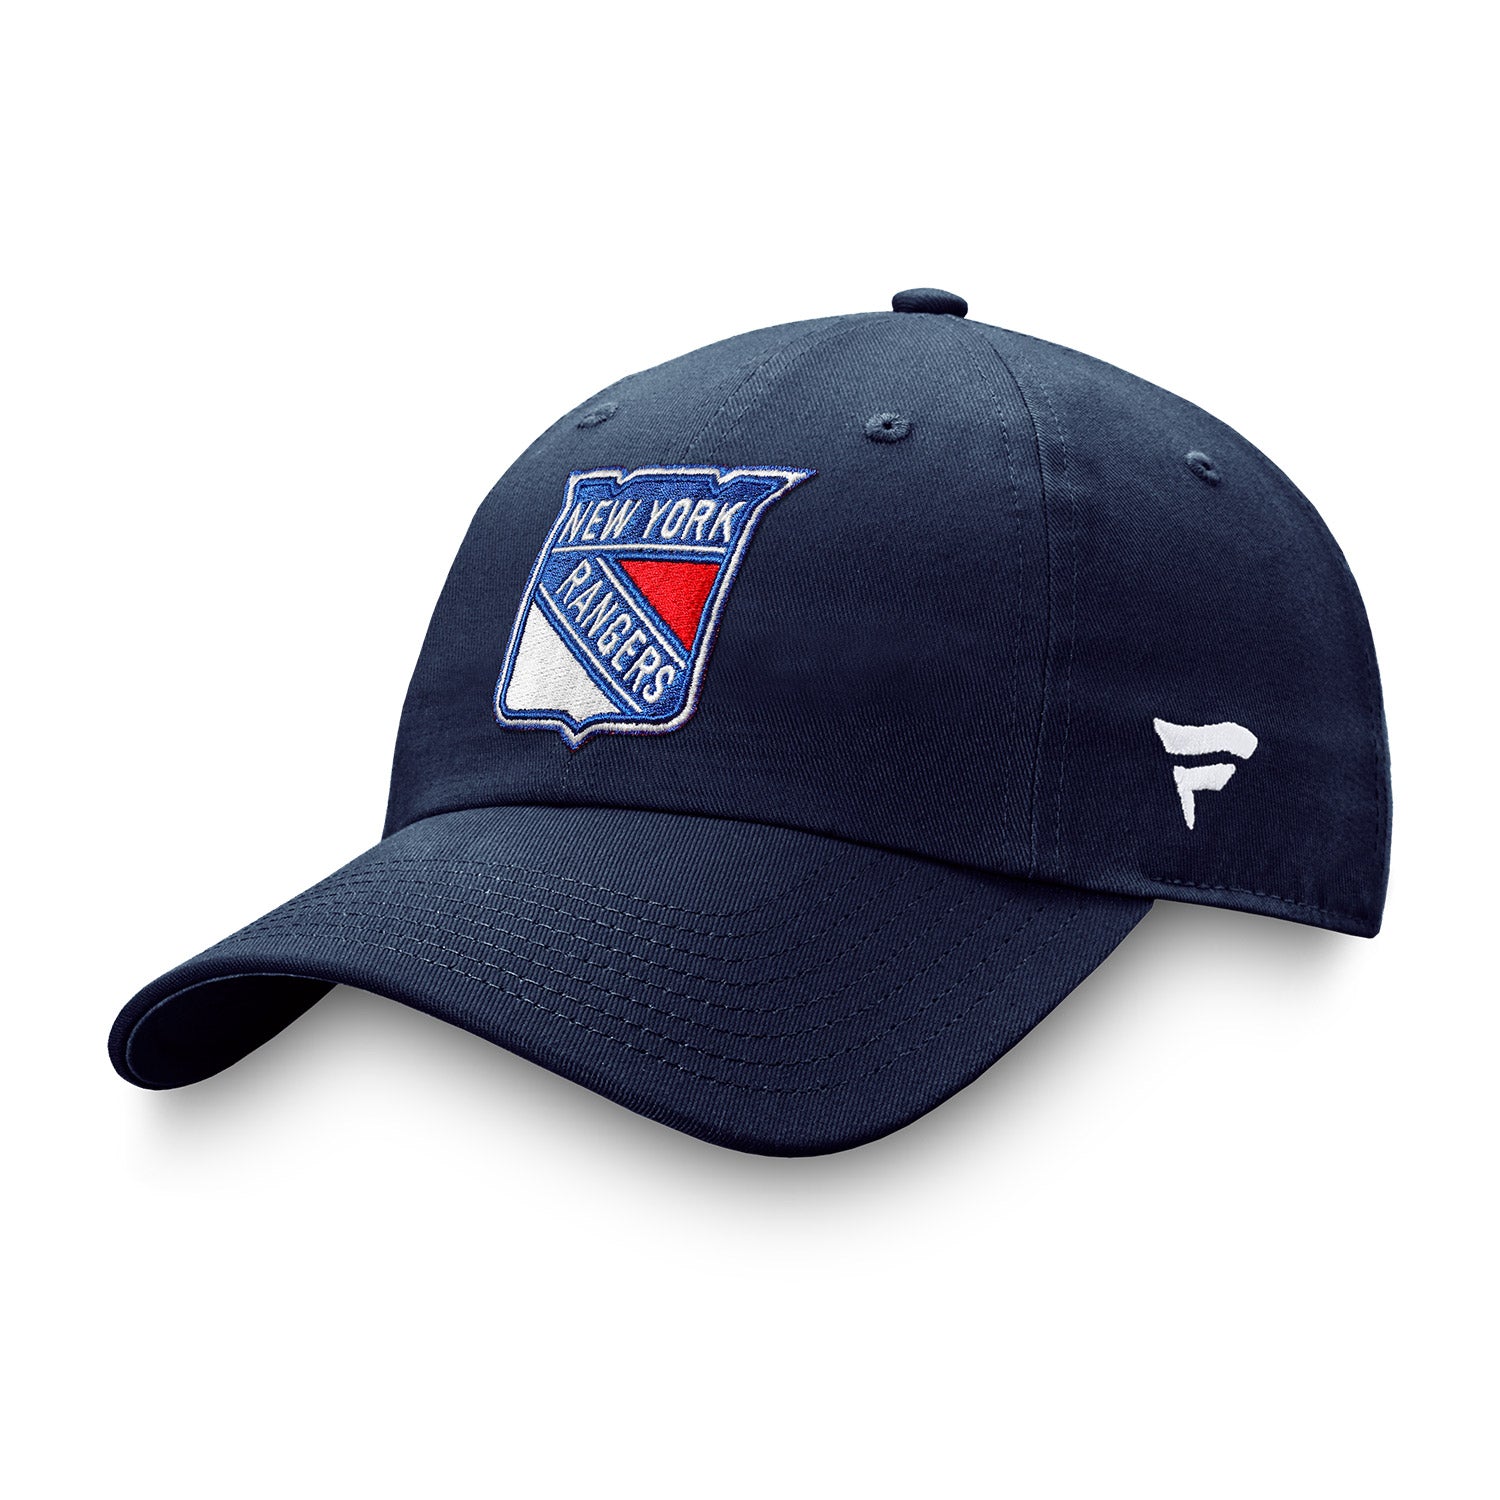 New York Rangers Hats, Officially Licensed Headwear